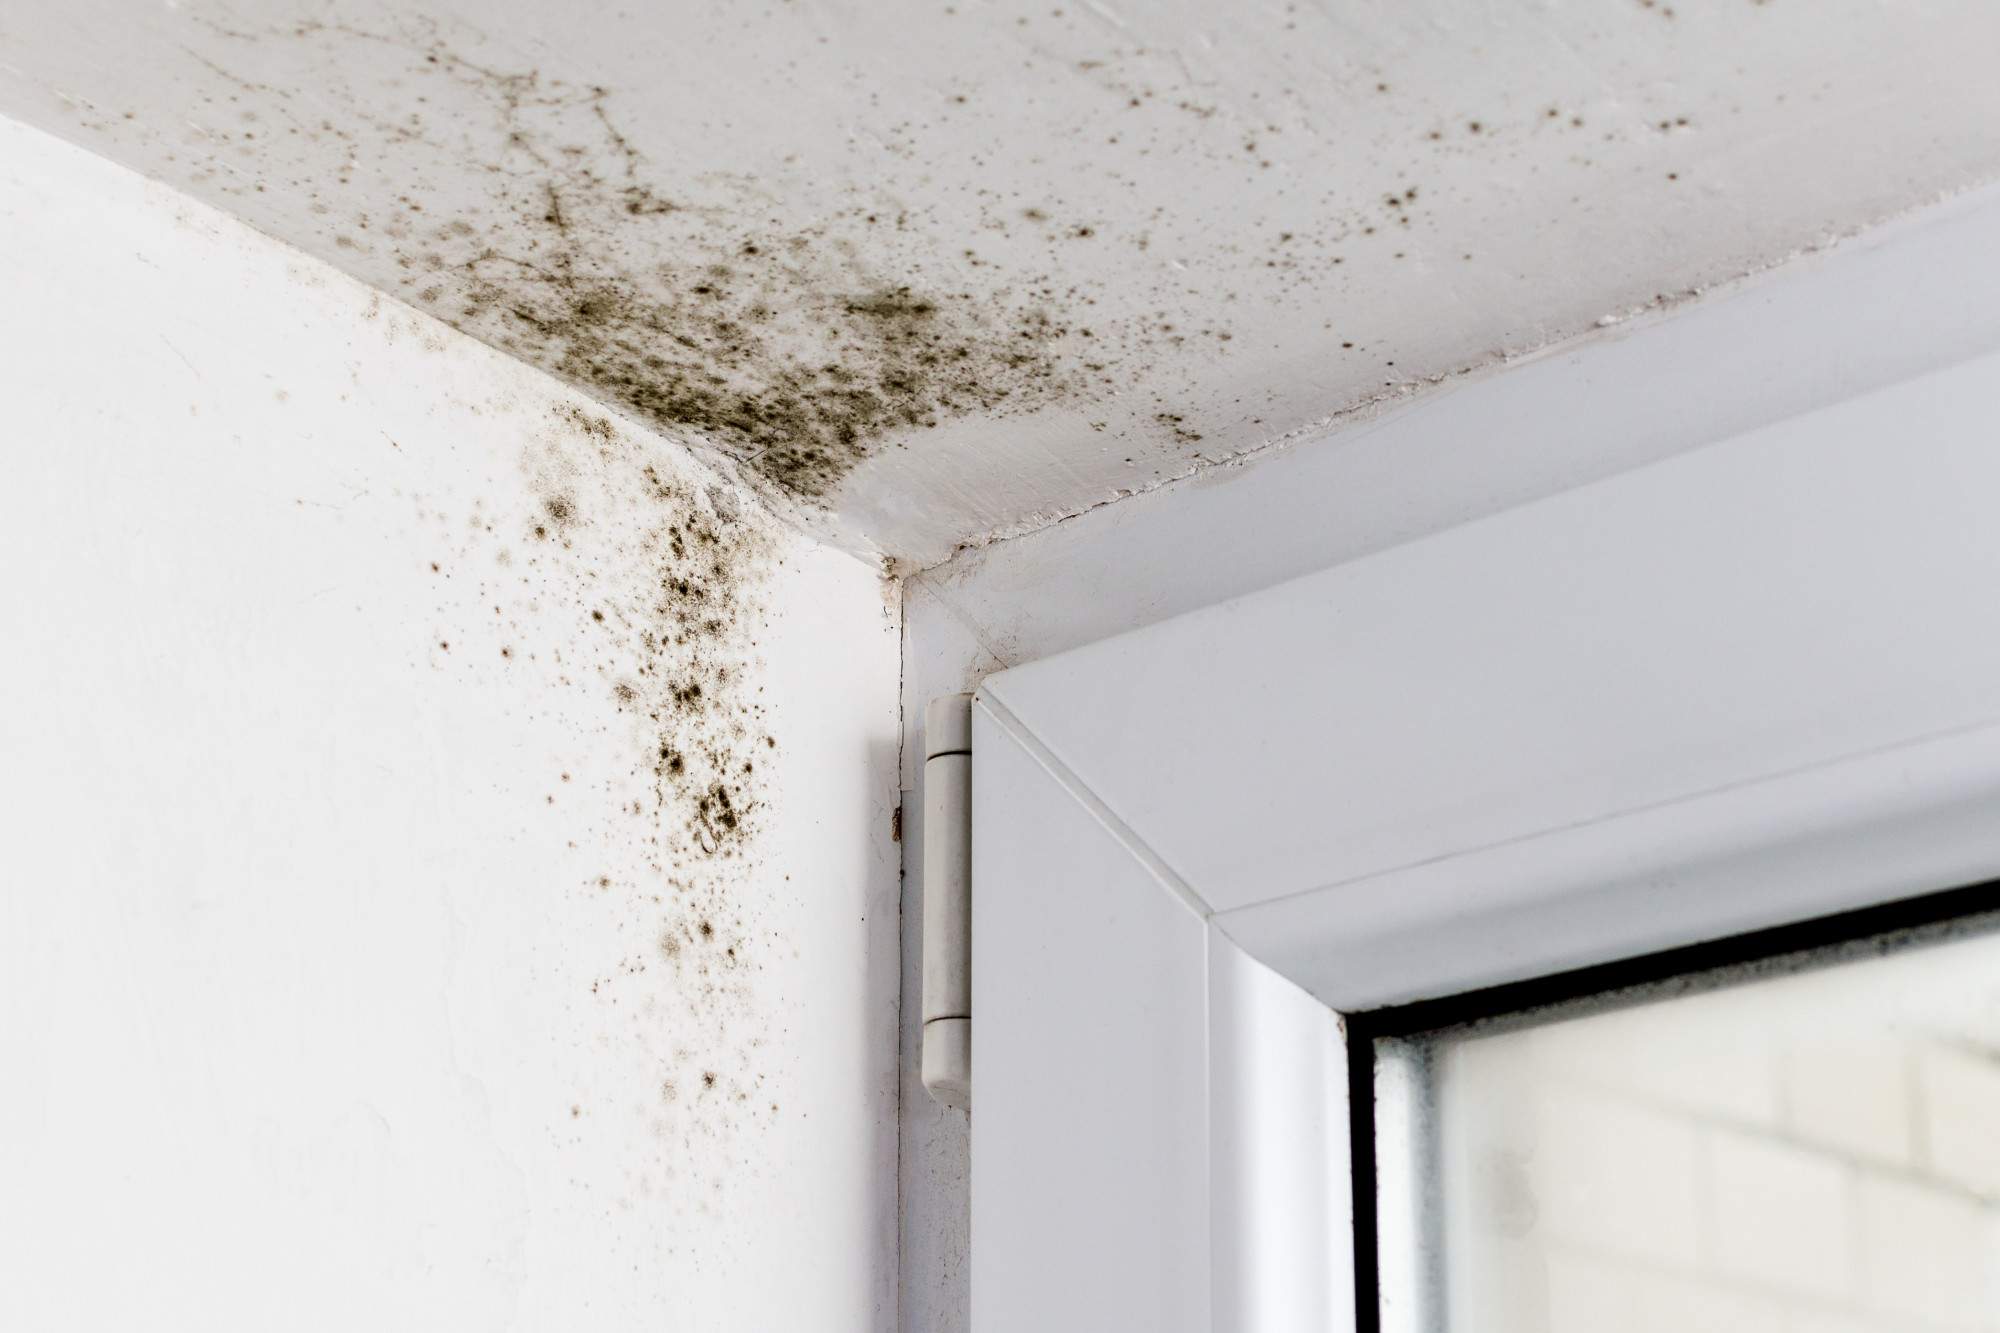 Signs of Mold in the House